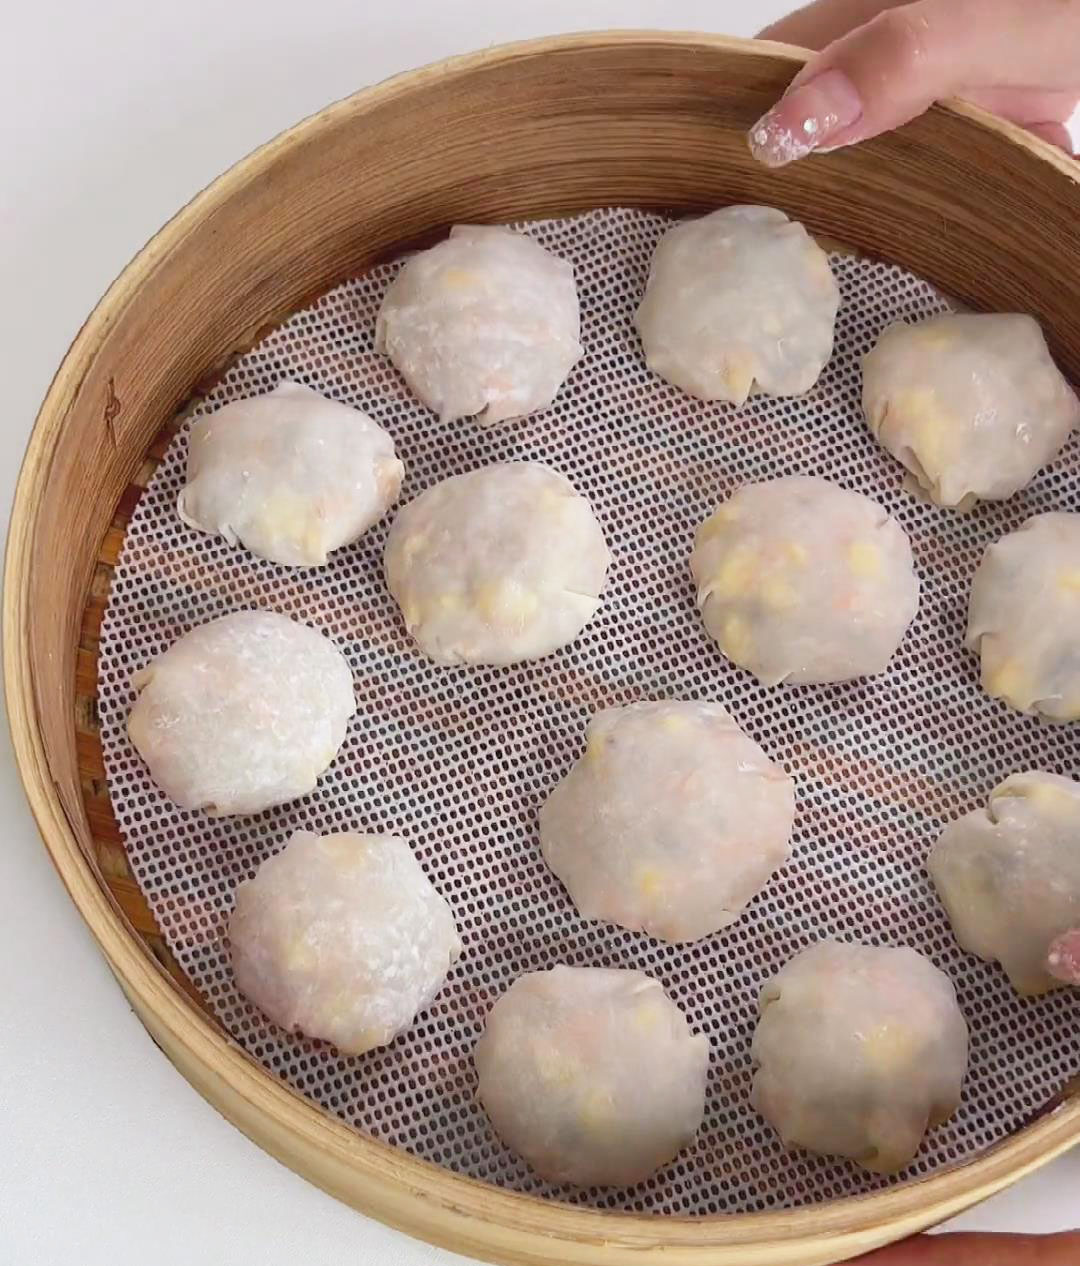 Line the steamer basket with parchment paper and place the wontons